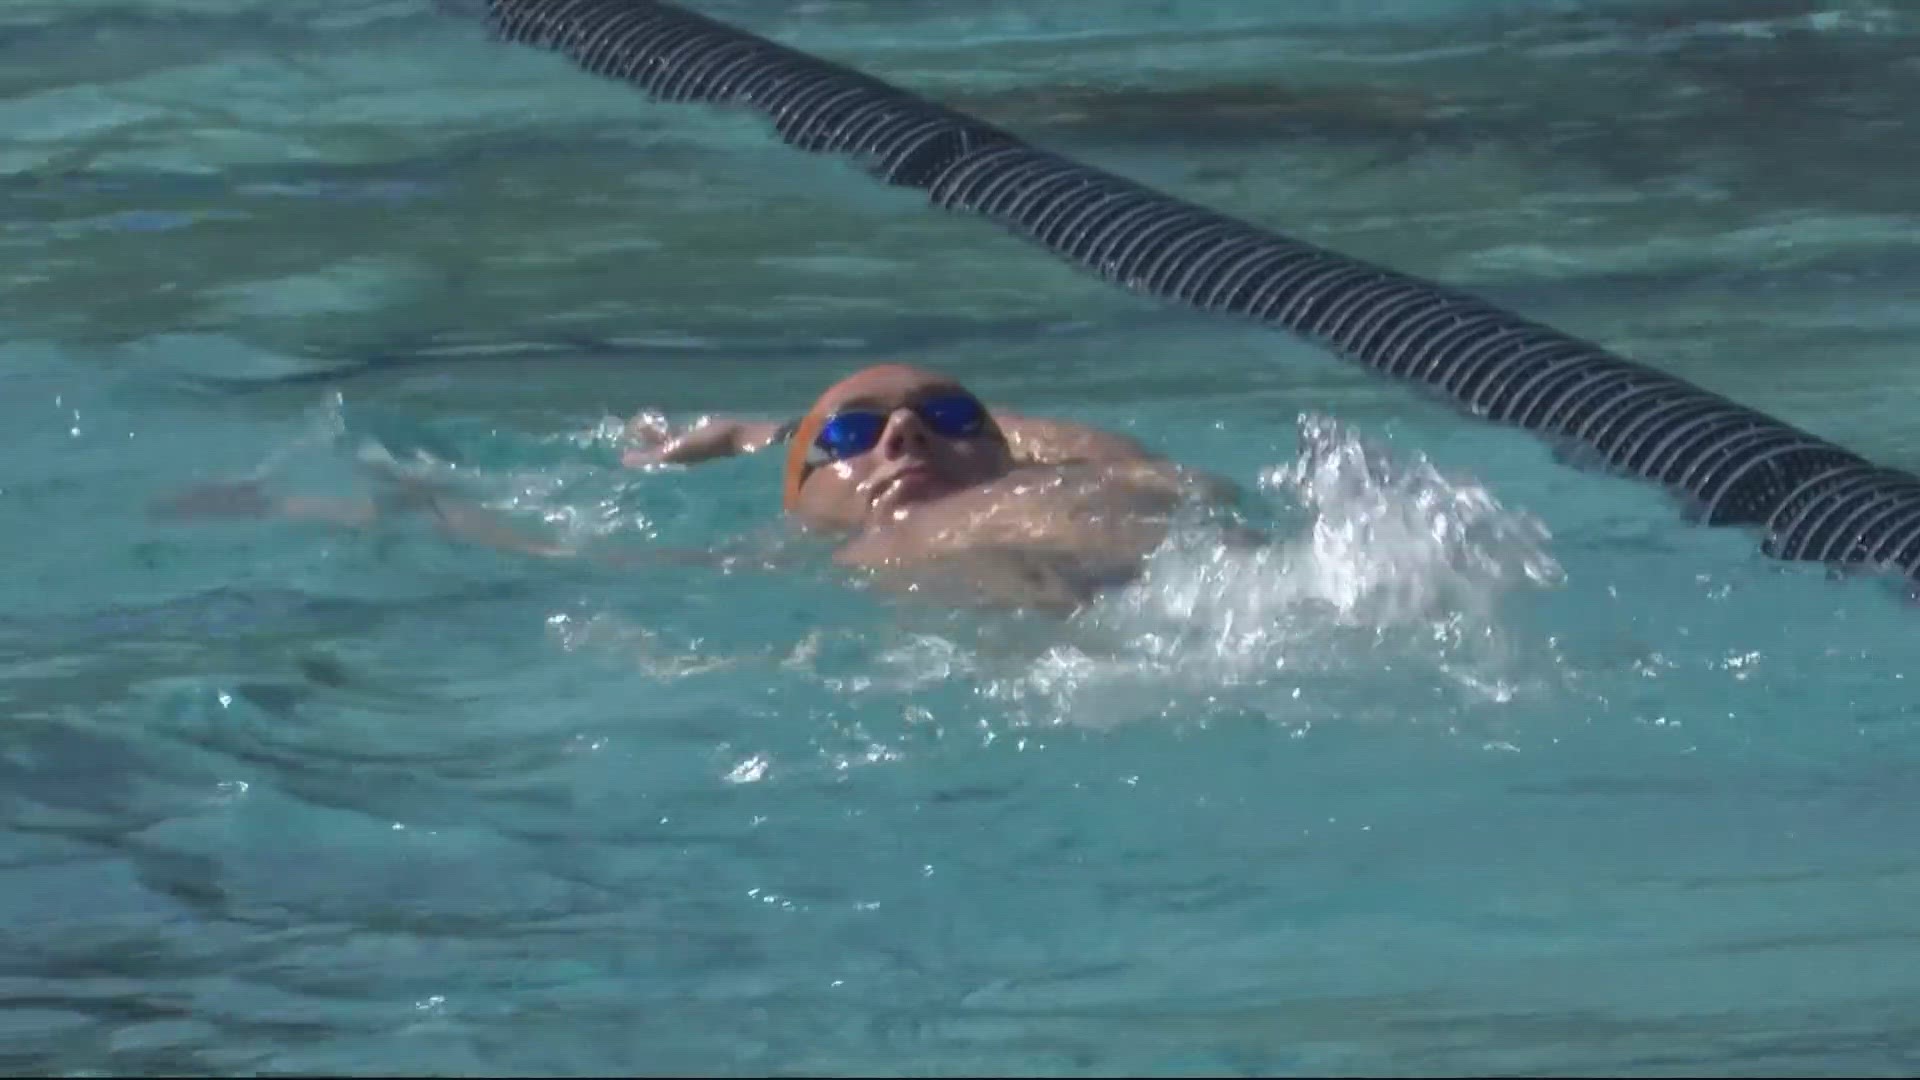 High school swimmers at The Bolles School in Jacksonville, hope to follow in the footsteps of Olympic medalists who have went through the school's program.